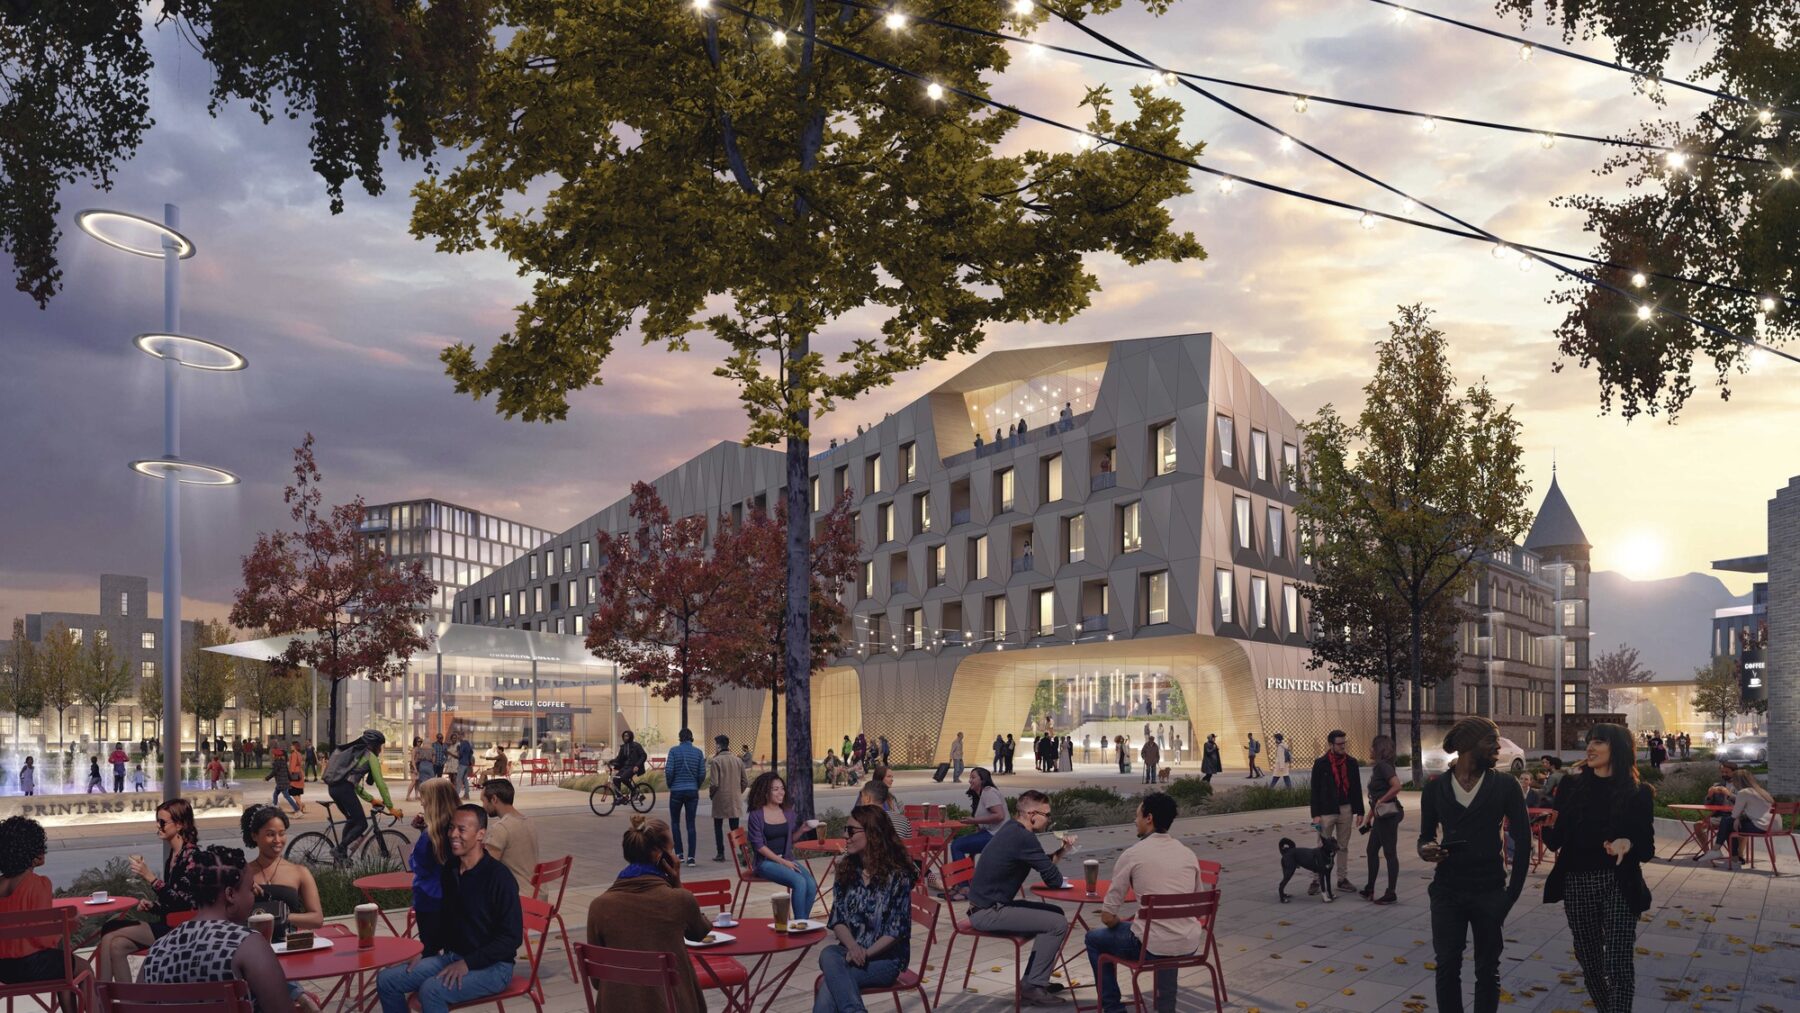 Rendering showing the quad's western edge and the expansion of the castle accomodating a new boutique hotel and outdoor patio cafe seating